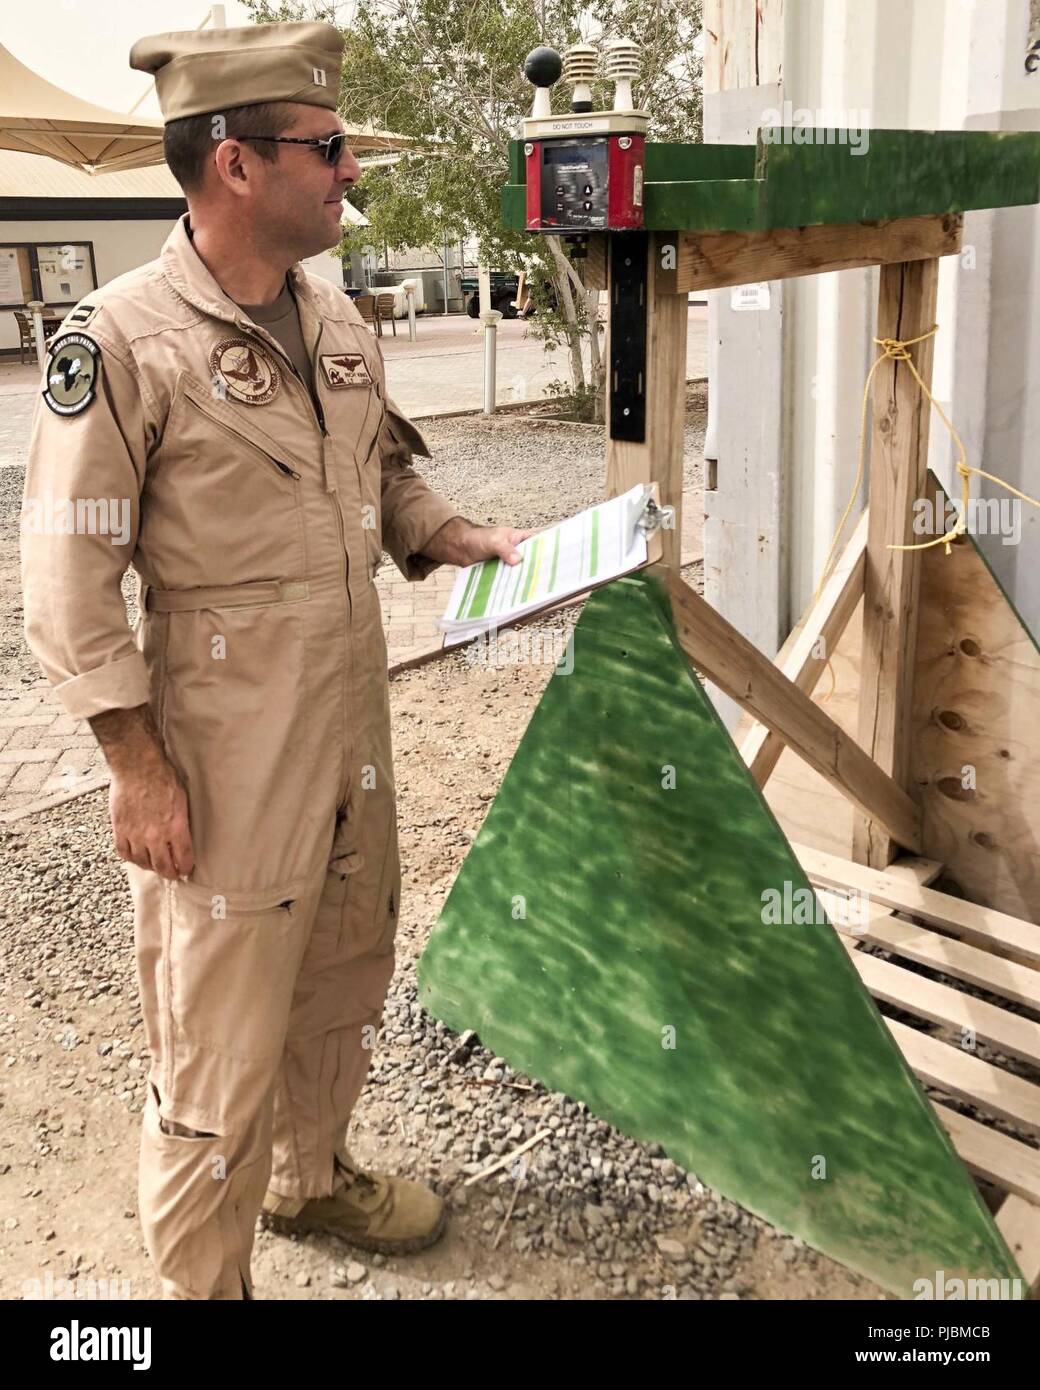 CAMP LEMONNIER, Djibouti – Camp Lemonnier (CLDJ) Safety Officer, Navy Lt. Rich King, inspects the Wet Bulb Globe Temperature (WBGT) device, which is used to measure environmental conditions during physical exercise, June 6, 2018. CLDJ is scheduled to install a second WBGT unit near the turf field on base. Stock Photo